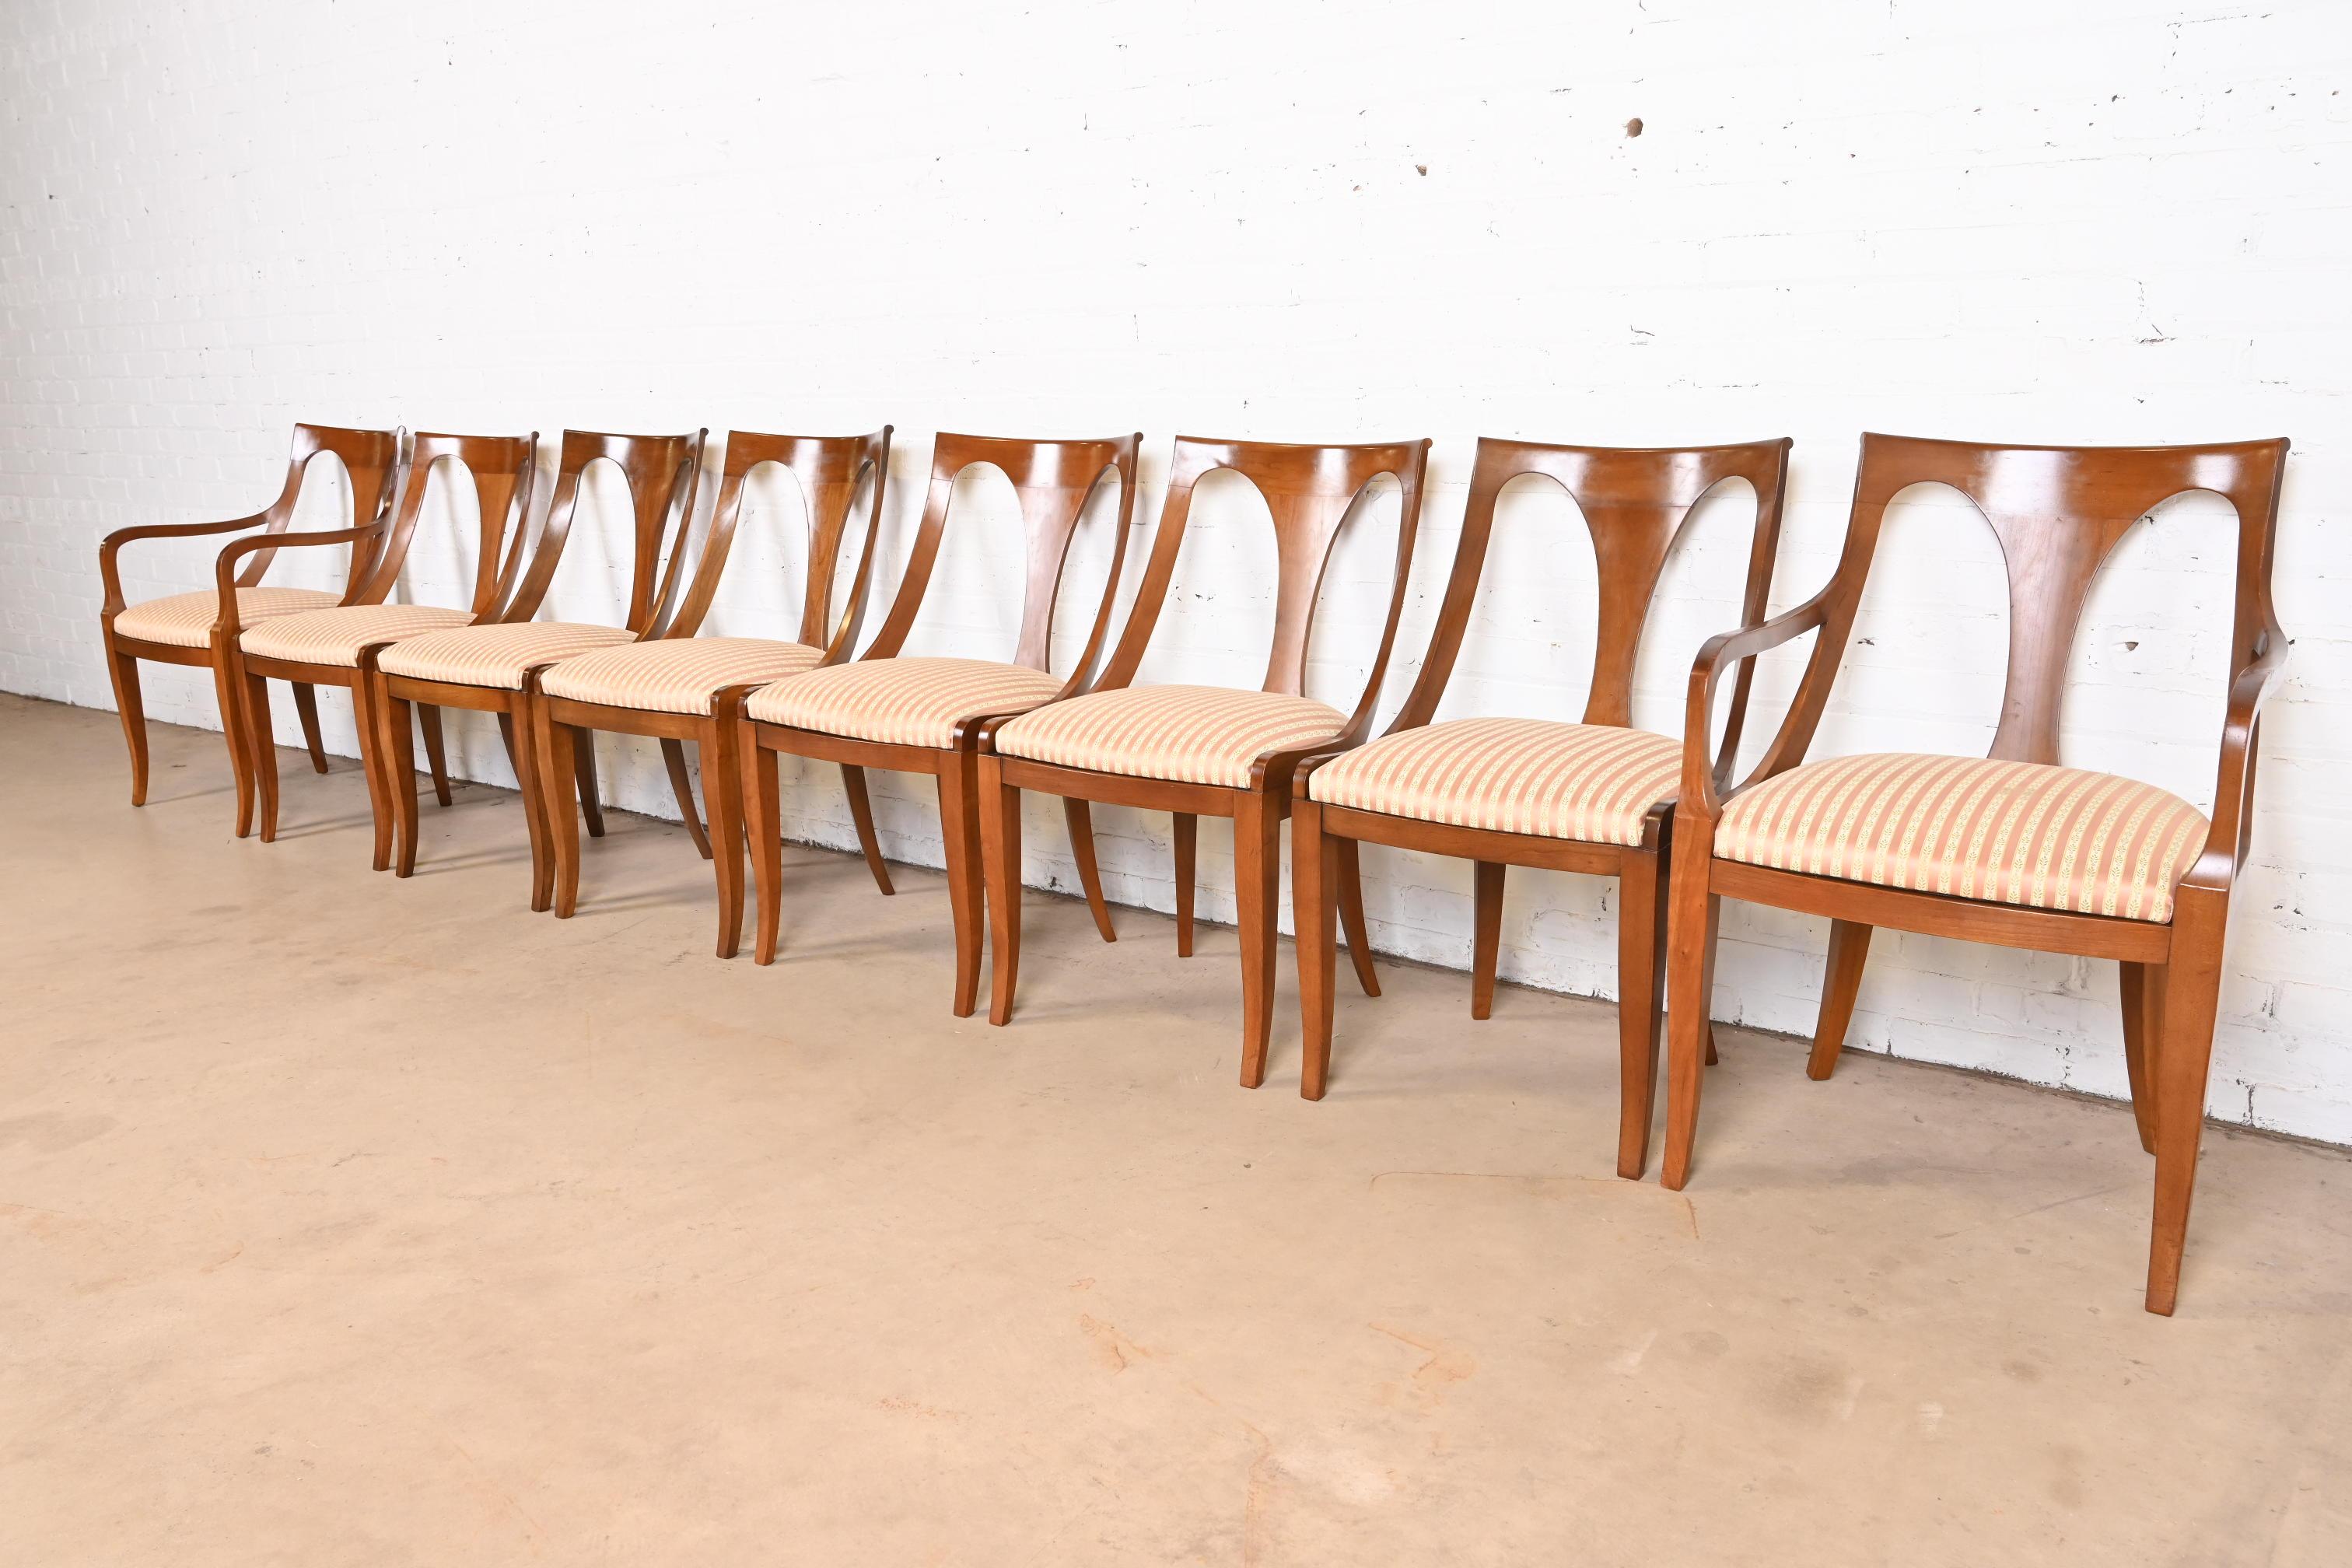 Late 20th Century Kindel Furniture Regency Solid Cherry Wood Dining Chairs, Set of Eight For Sale